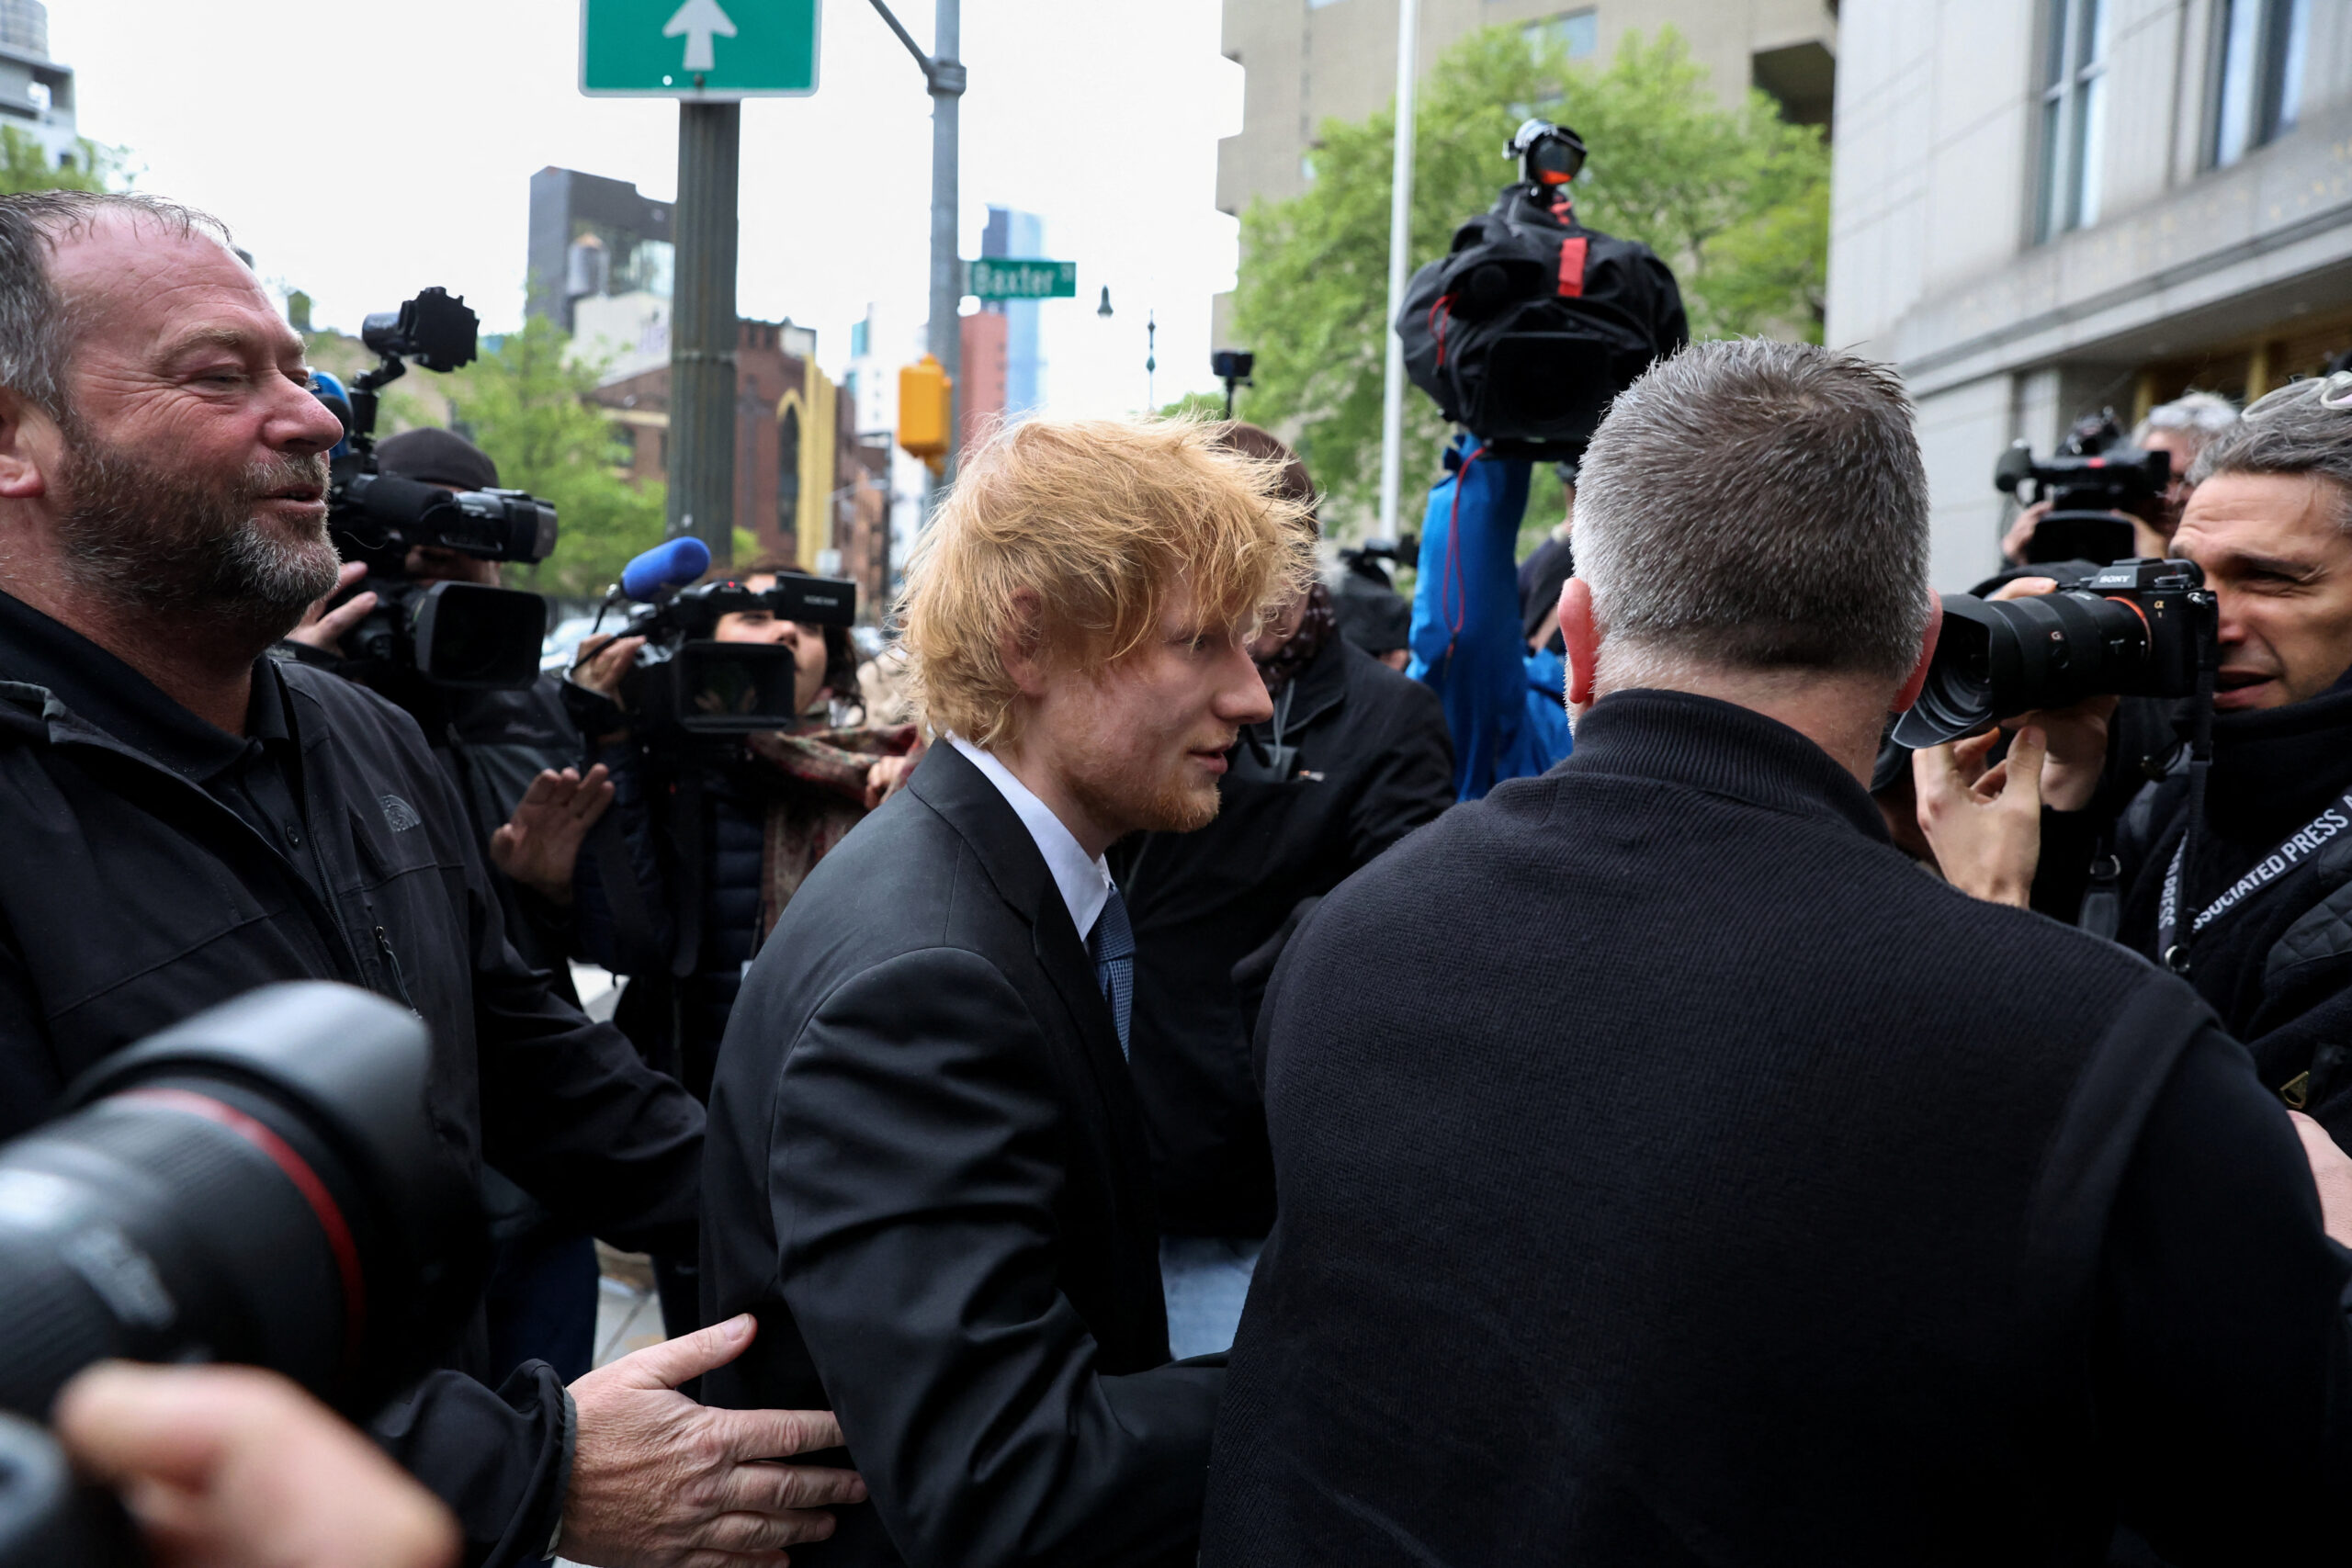 Singer Ed Sheeran arrives at the Manhattan federal court for his copyright trial in New York City, U.S., May 4, 2023. REUTERS/Shannon Stapleton